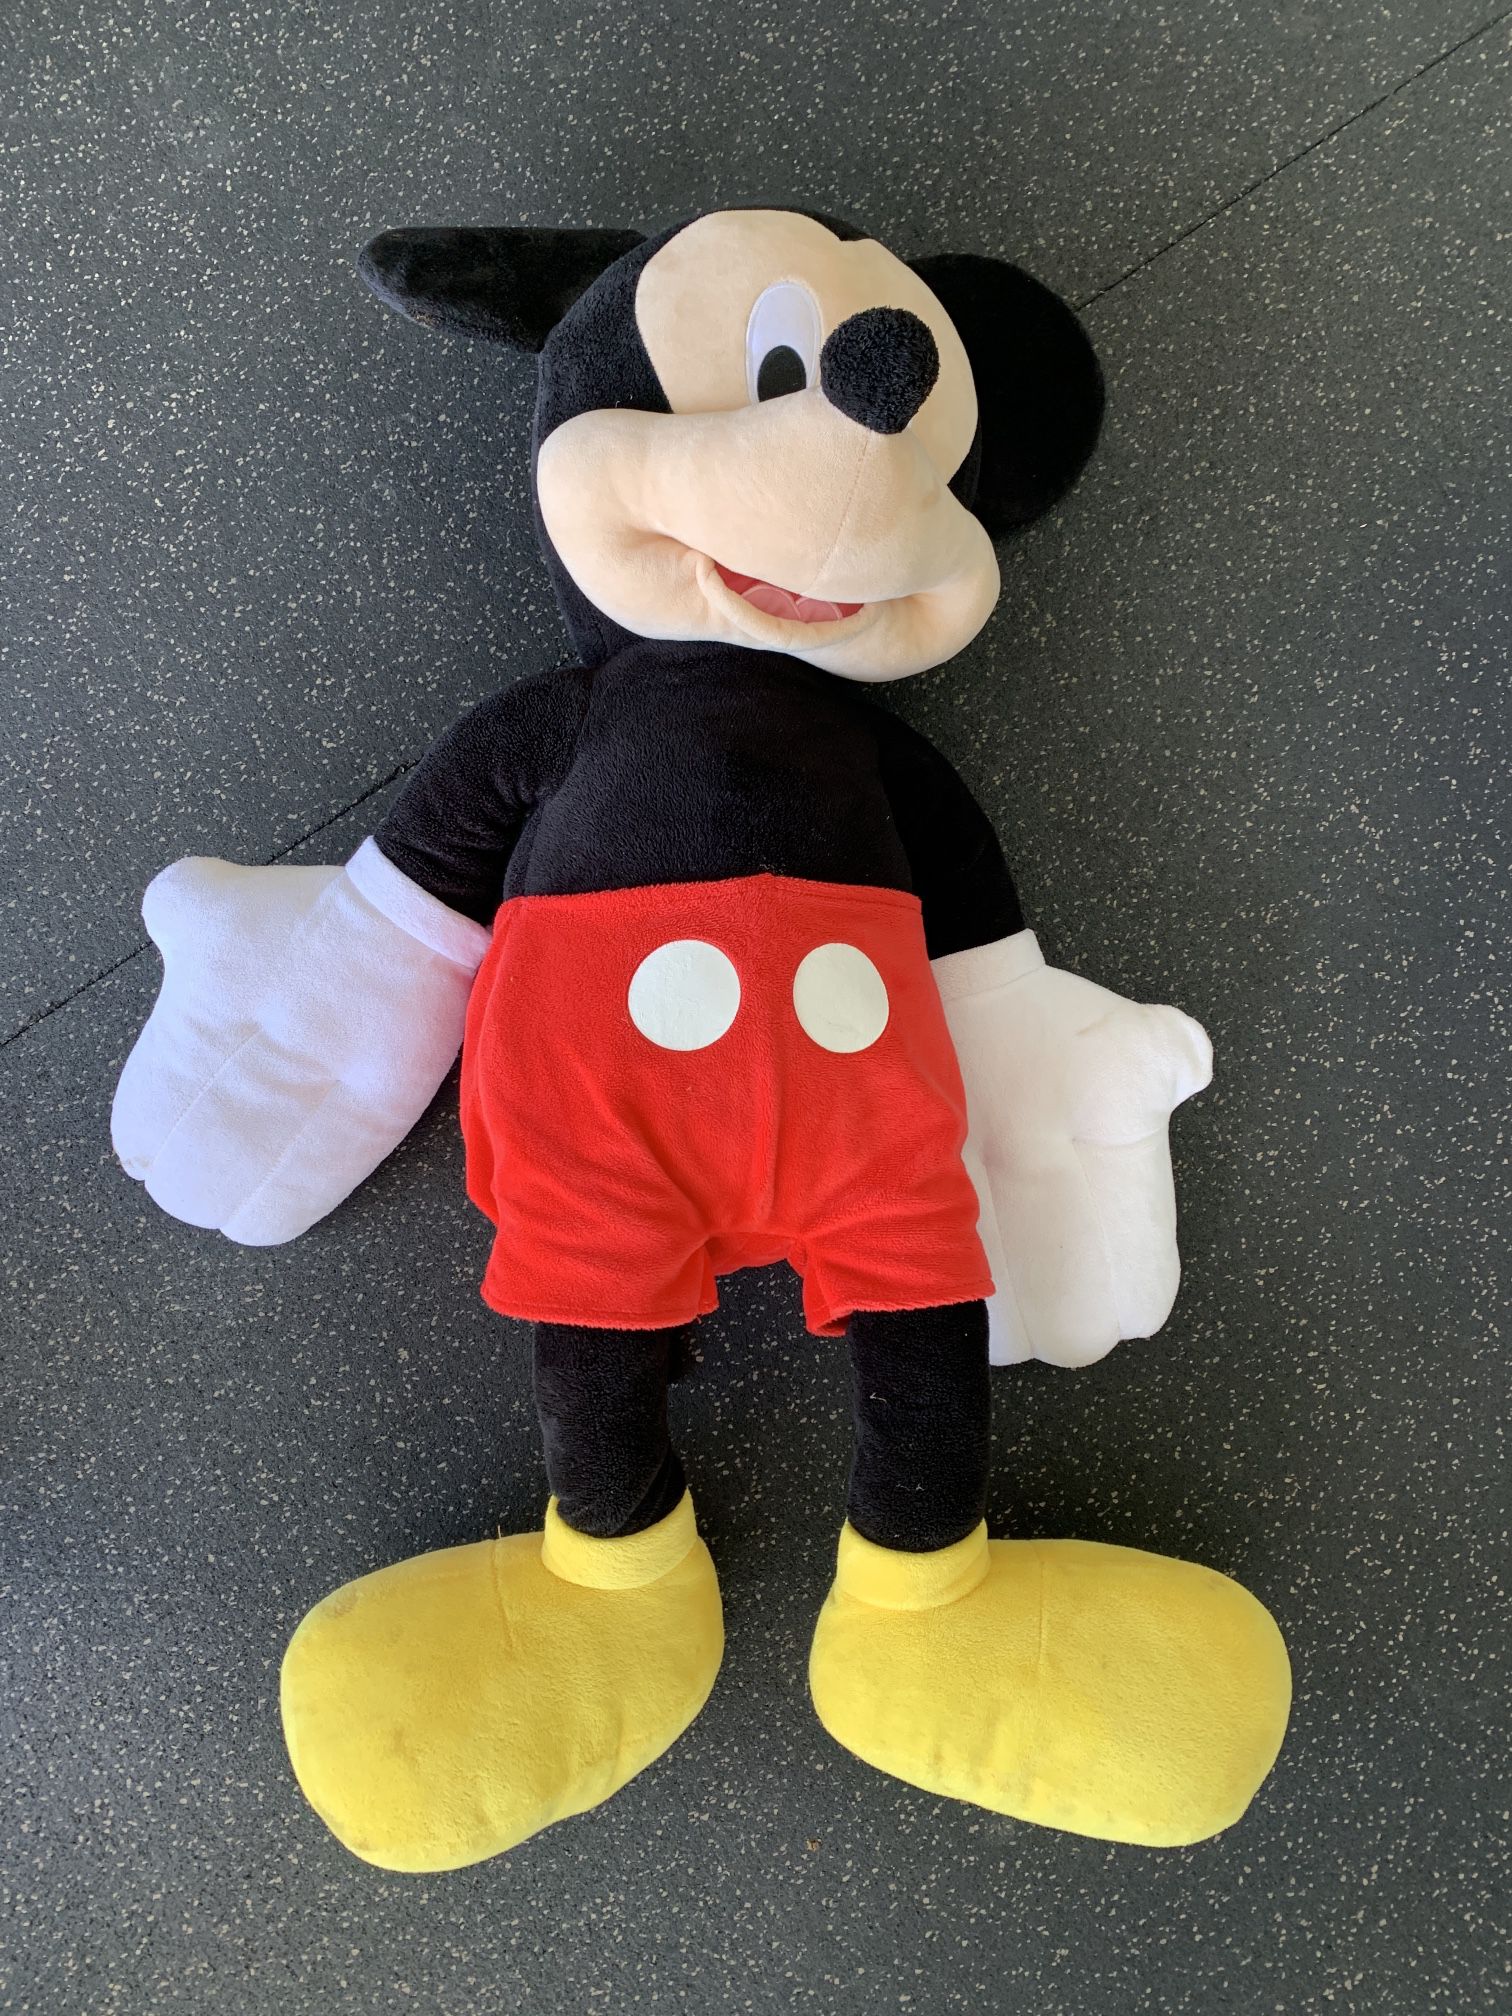 Giant 3.5 Foot Mickey!!!!